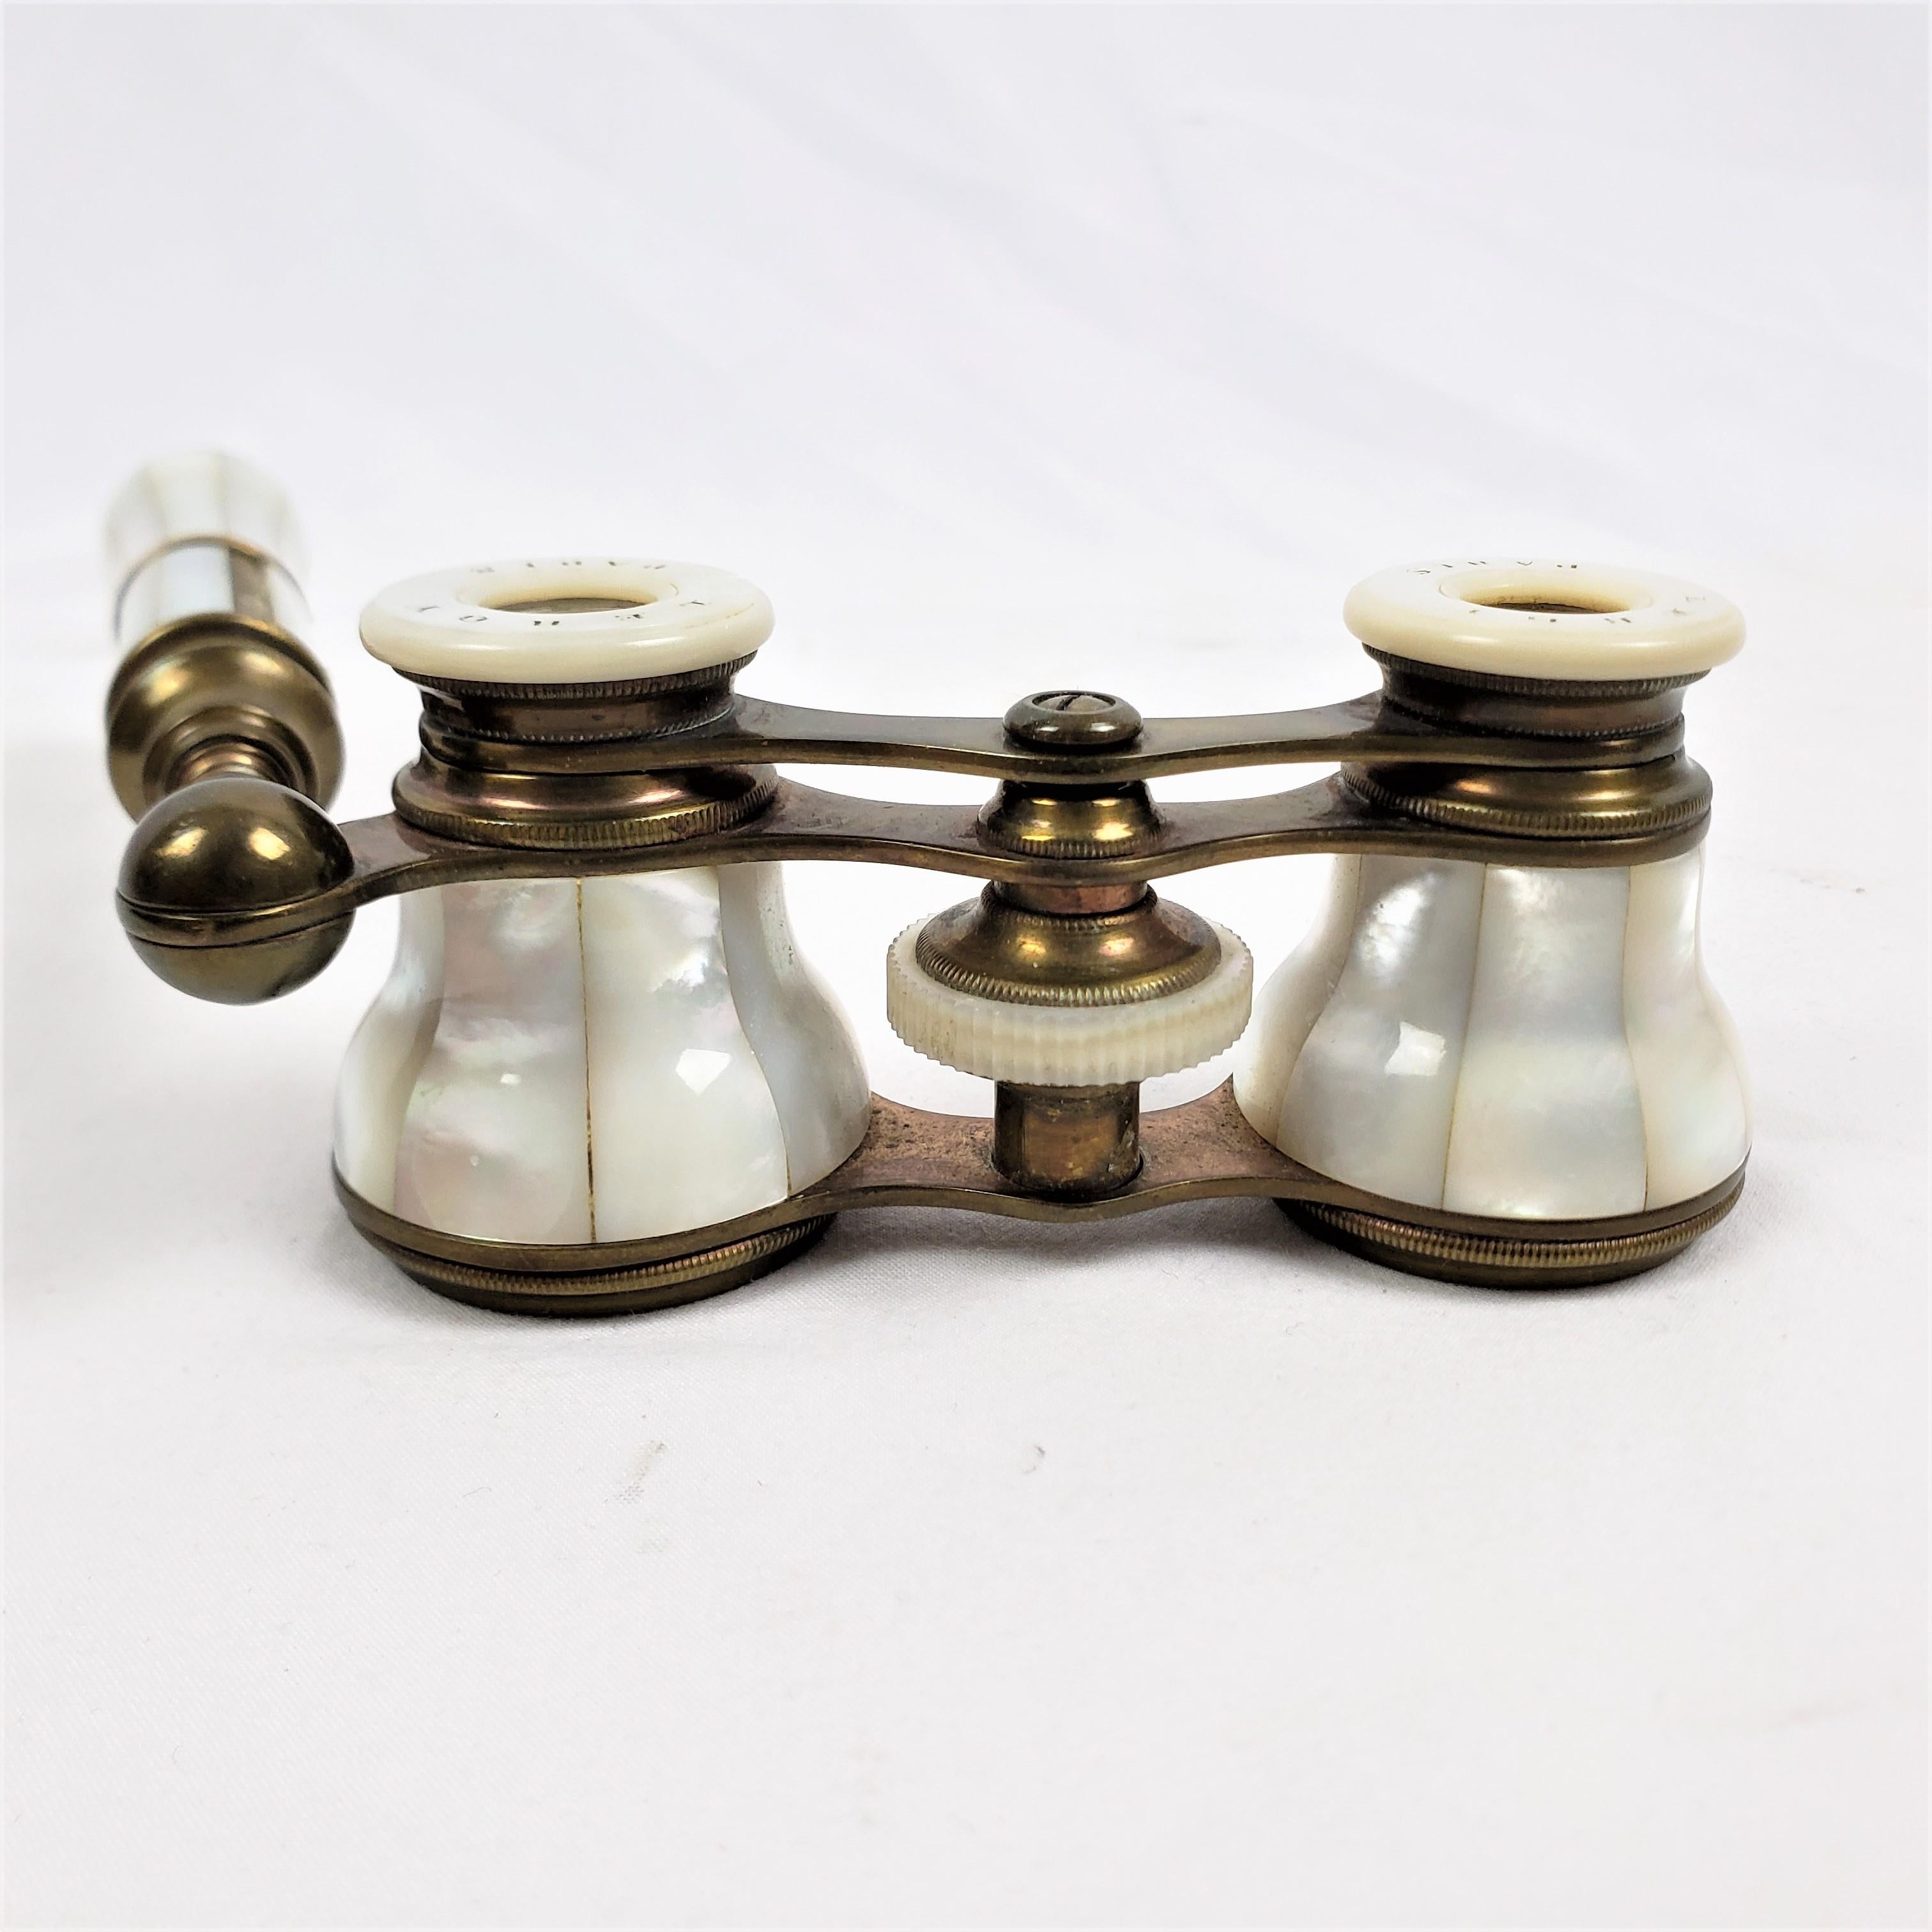 19th Century Antique French Lorgnette Binoculars or Opera Glasses in Brass & Mother of Pearl For Sale